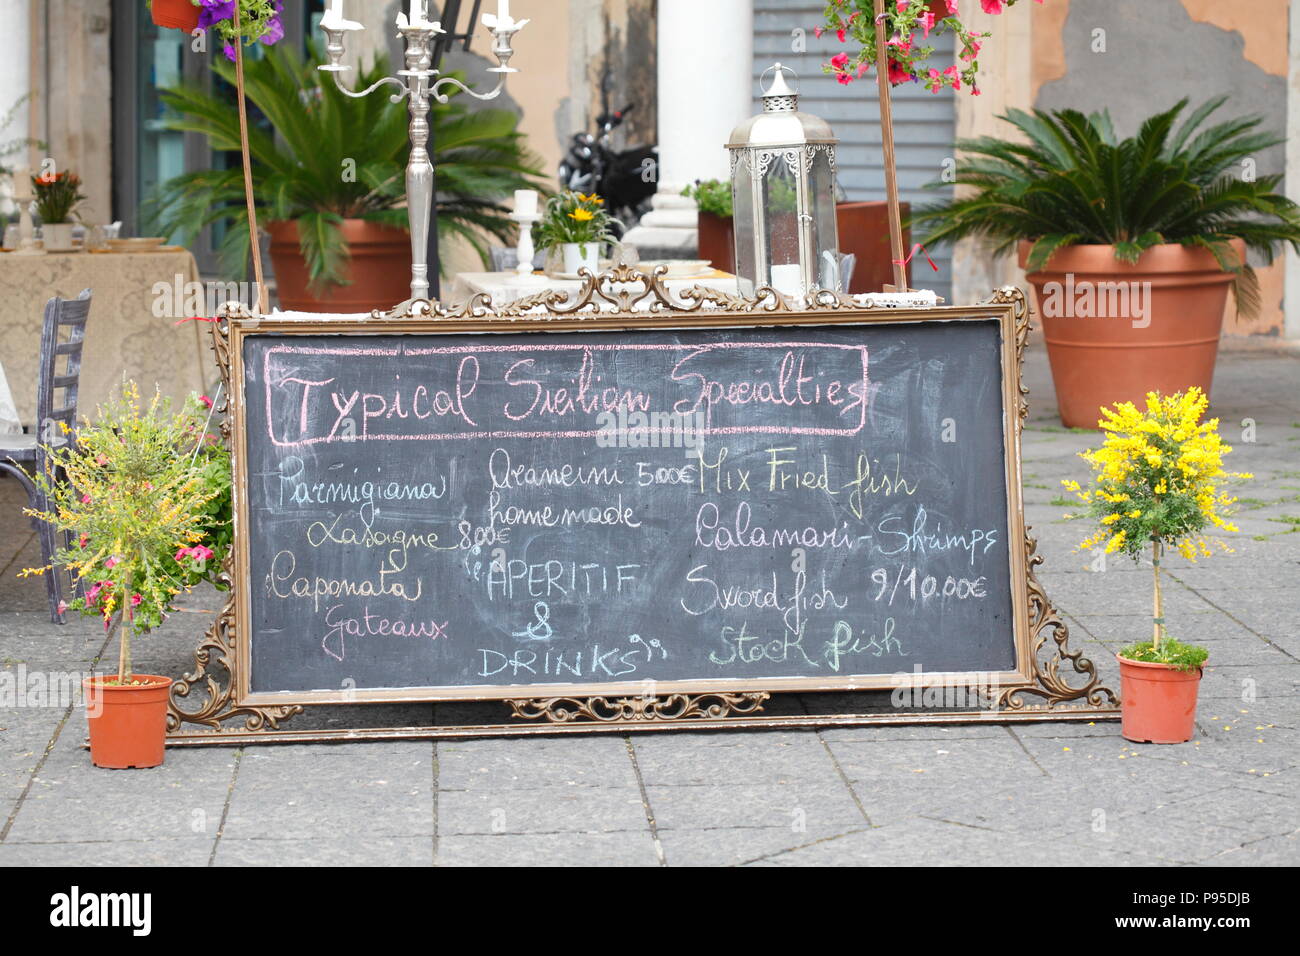 Menu with Sicilian specialties in front of a restaurant in the old town,, Catania, Sicily, Italy, Europe  I  Speisekarte mit Sizilianischen Spezialitä Stock Photo